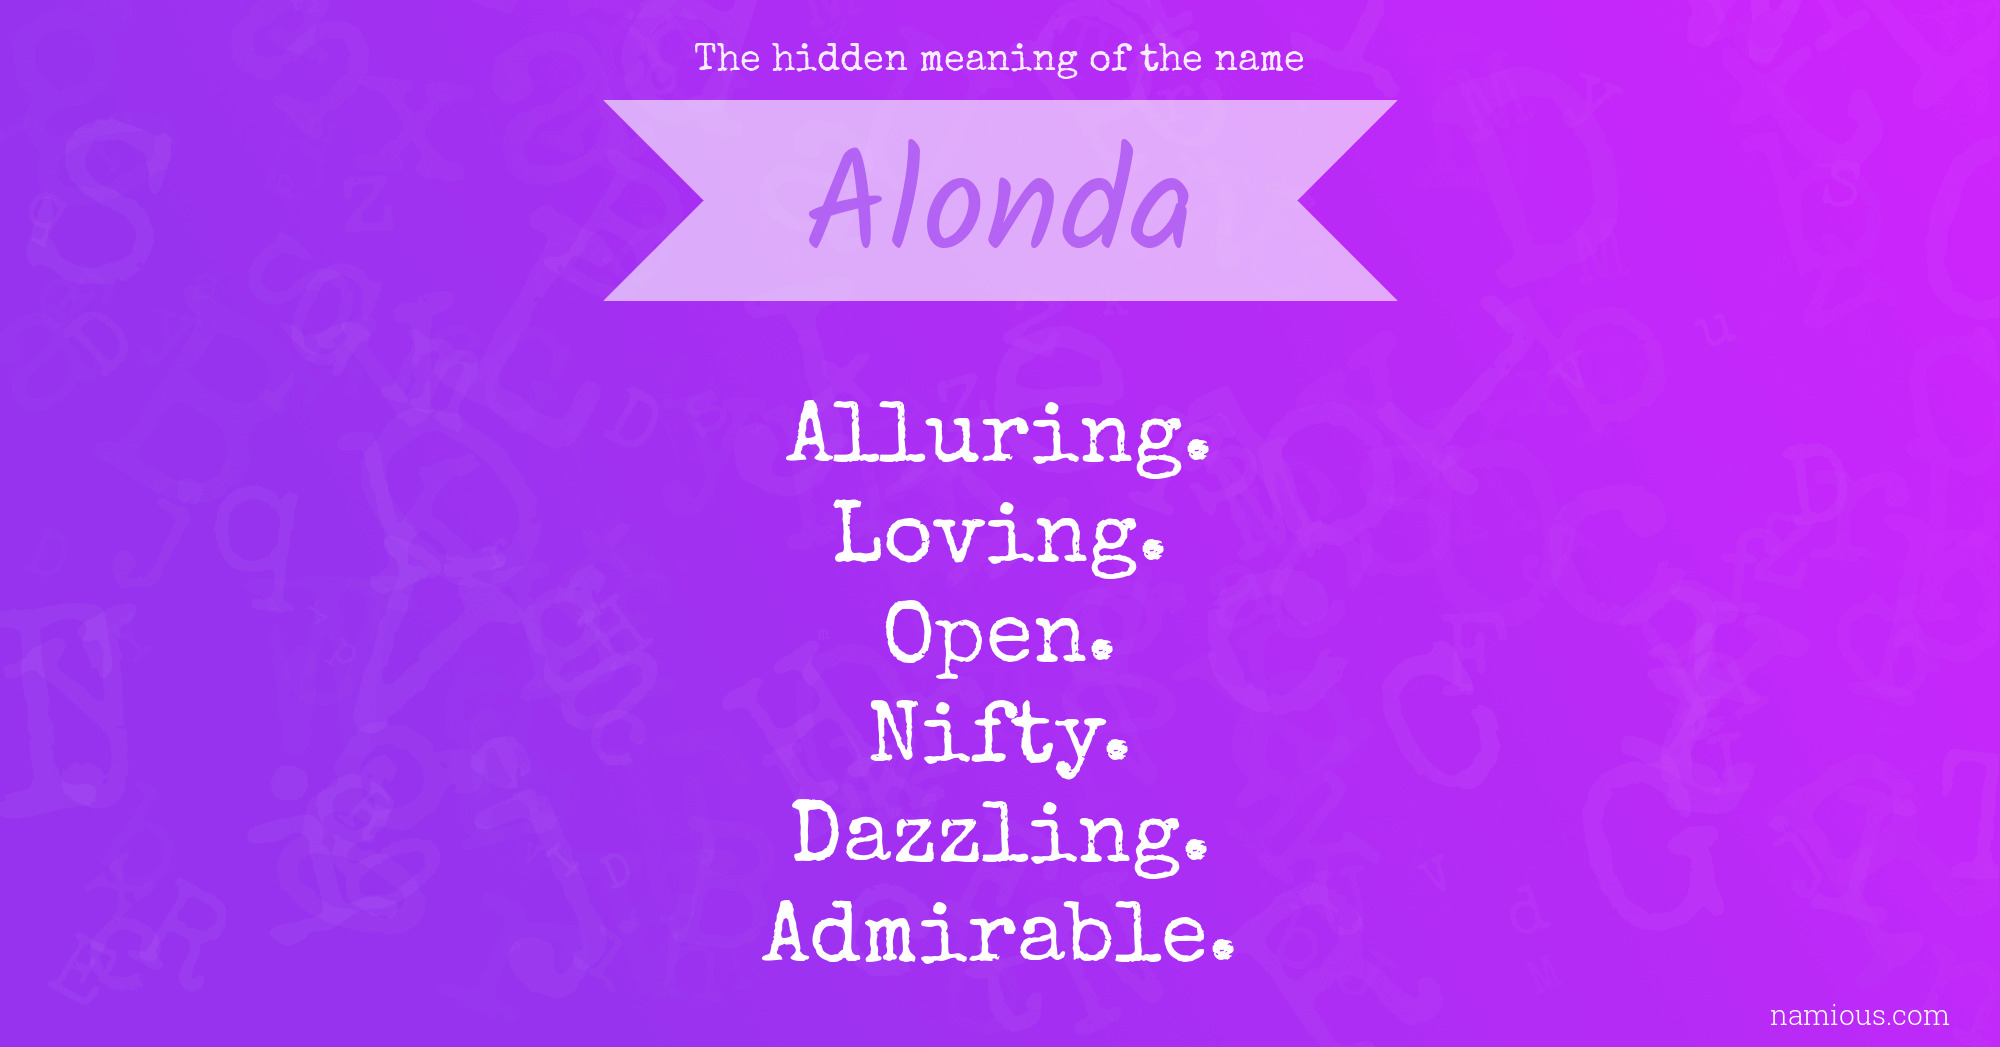 The hidden meaning of the name Alonda